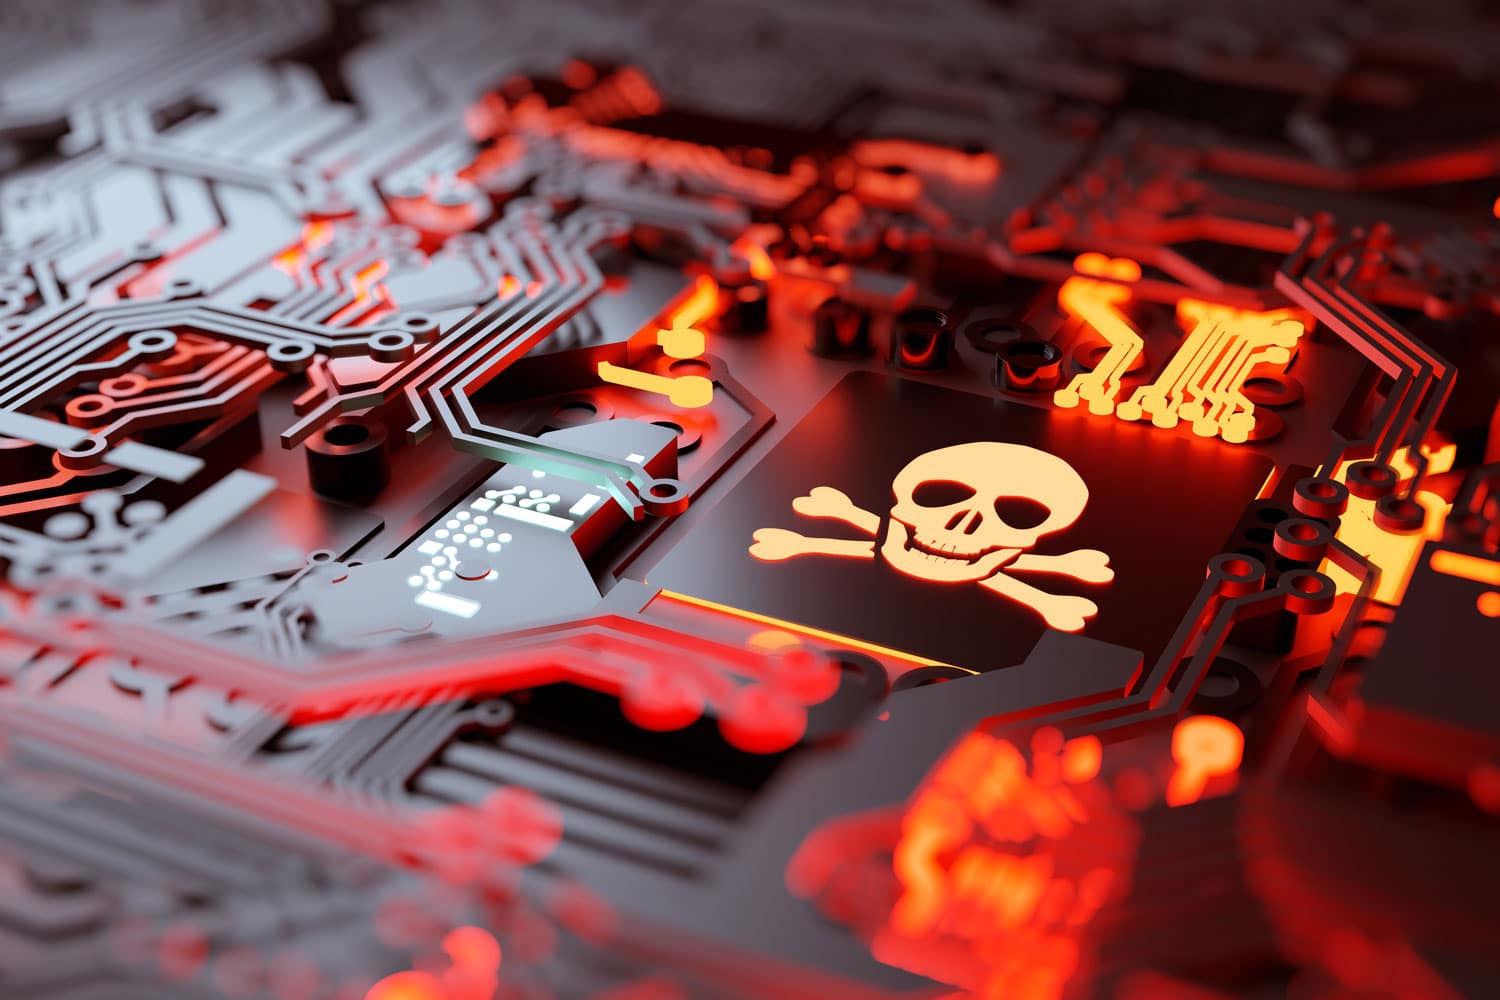 Skull & crossbones embedded in a computer motherboard glowing red